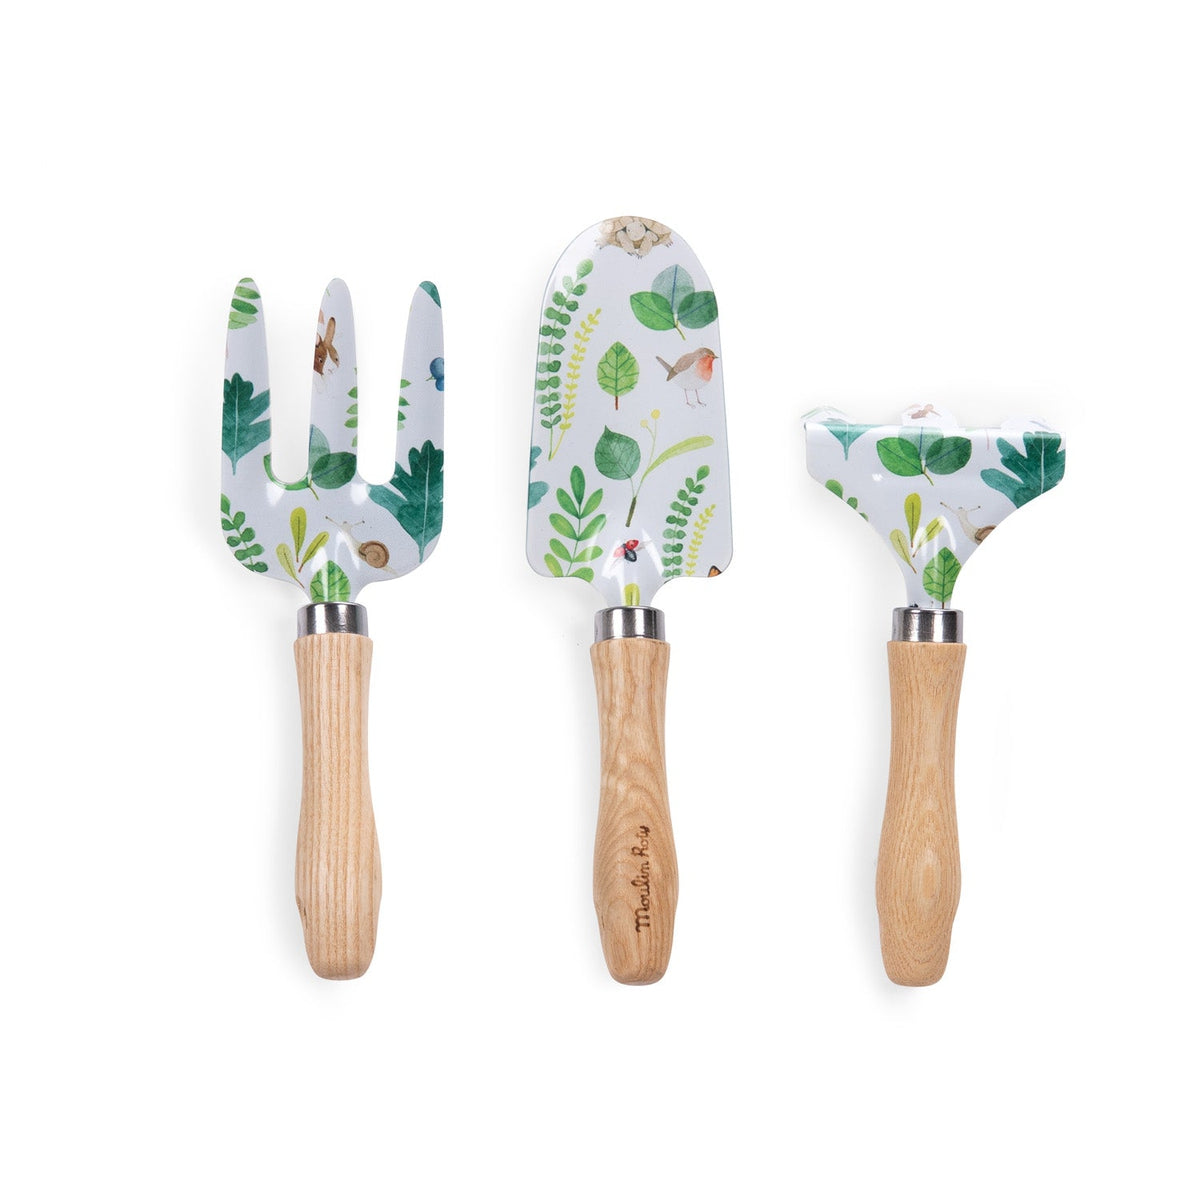 Moulin Roty le jardin set of gardening tools – Dilly Dally Kids